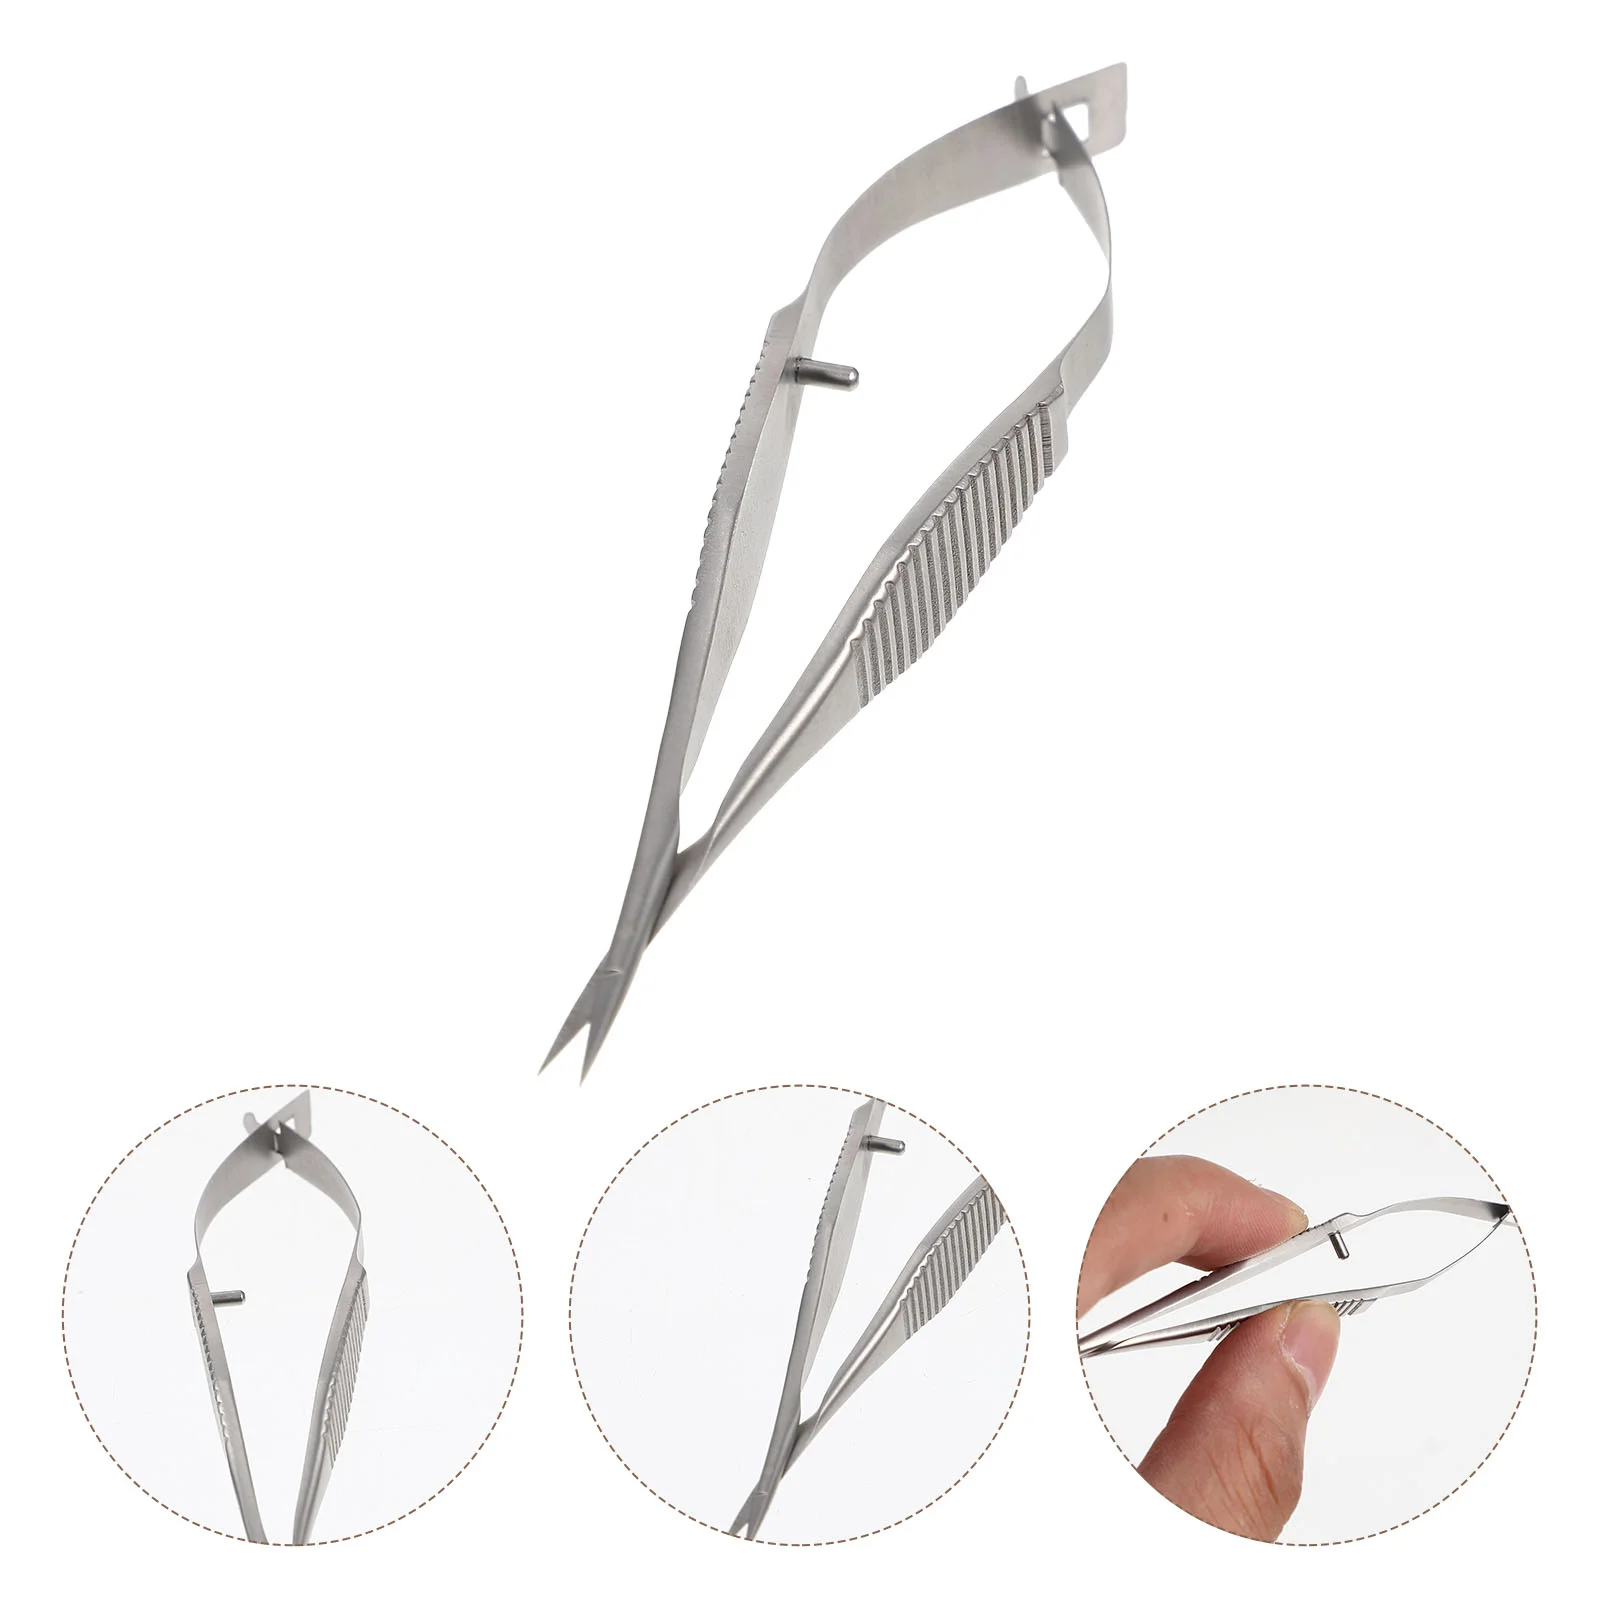 

Scissors Surgery Supply Stainless Steel Medical Metal Anatomy and Titanium Alloy Hospital Used Tool